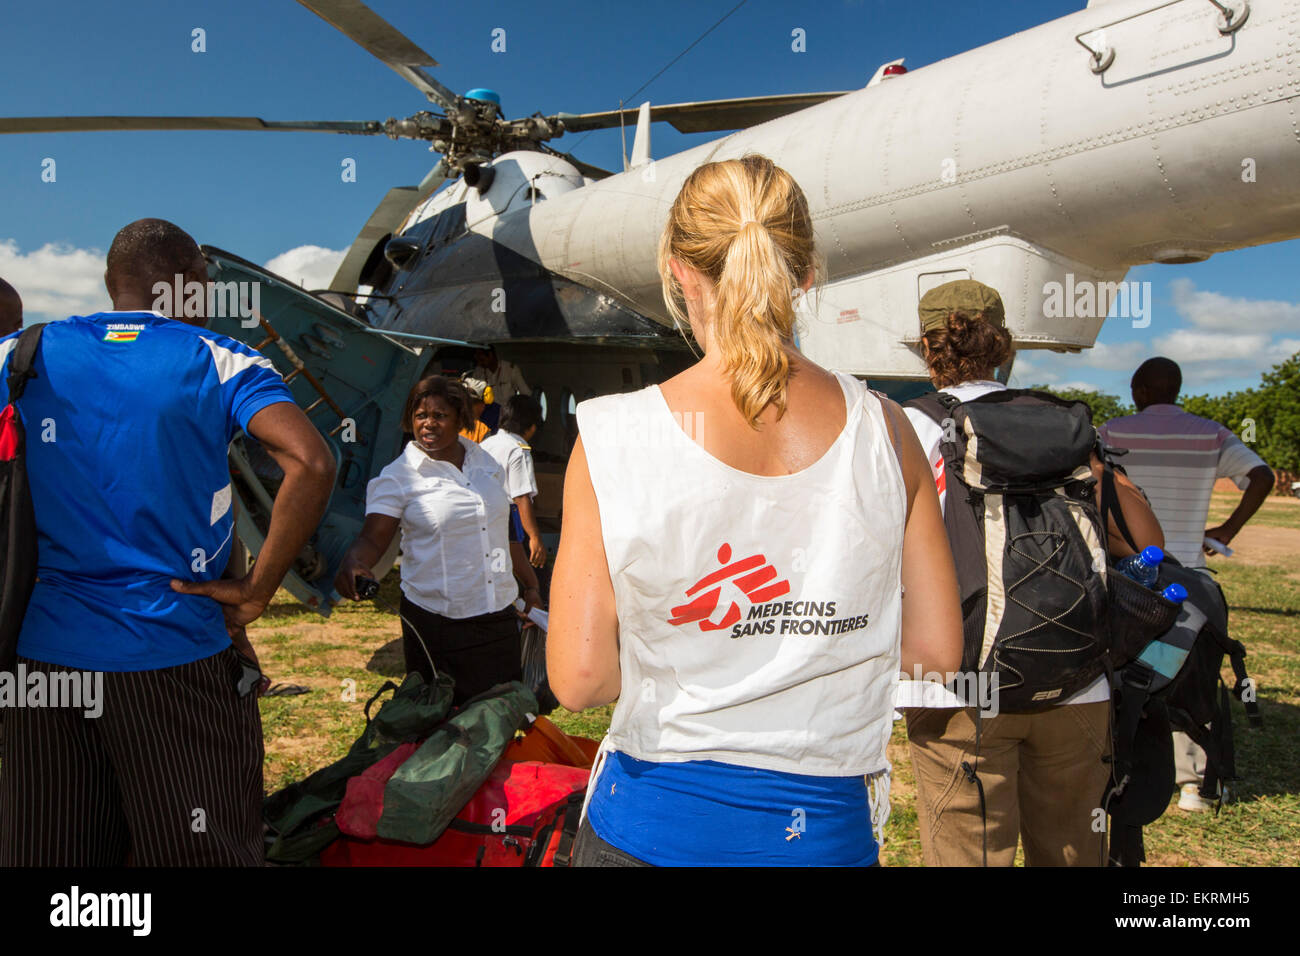 In mid January 2015, a three day period of excessive rain brought unprecedented floods to the small poor African country of Malawi. It displaced nearly quarter of a million people, devastated 64,000 hectares of land, and killed several hundred people. This shot shows A Russian Mi8 helicopter being used by the United Nations, World Food Program to deliver food aid and Medicin Sans Frontieres docotrs to areas still cut off by the flooding, around Bangula and Mkhanga. Stock Photo